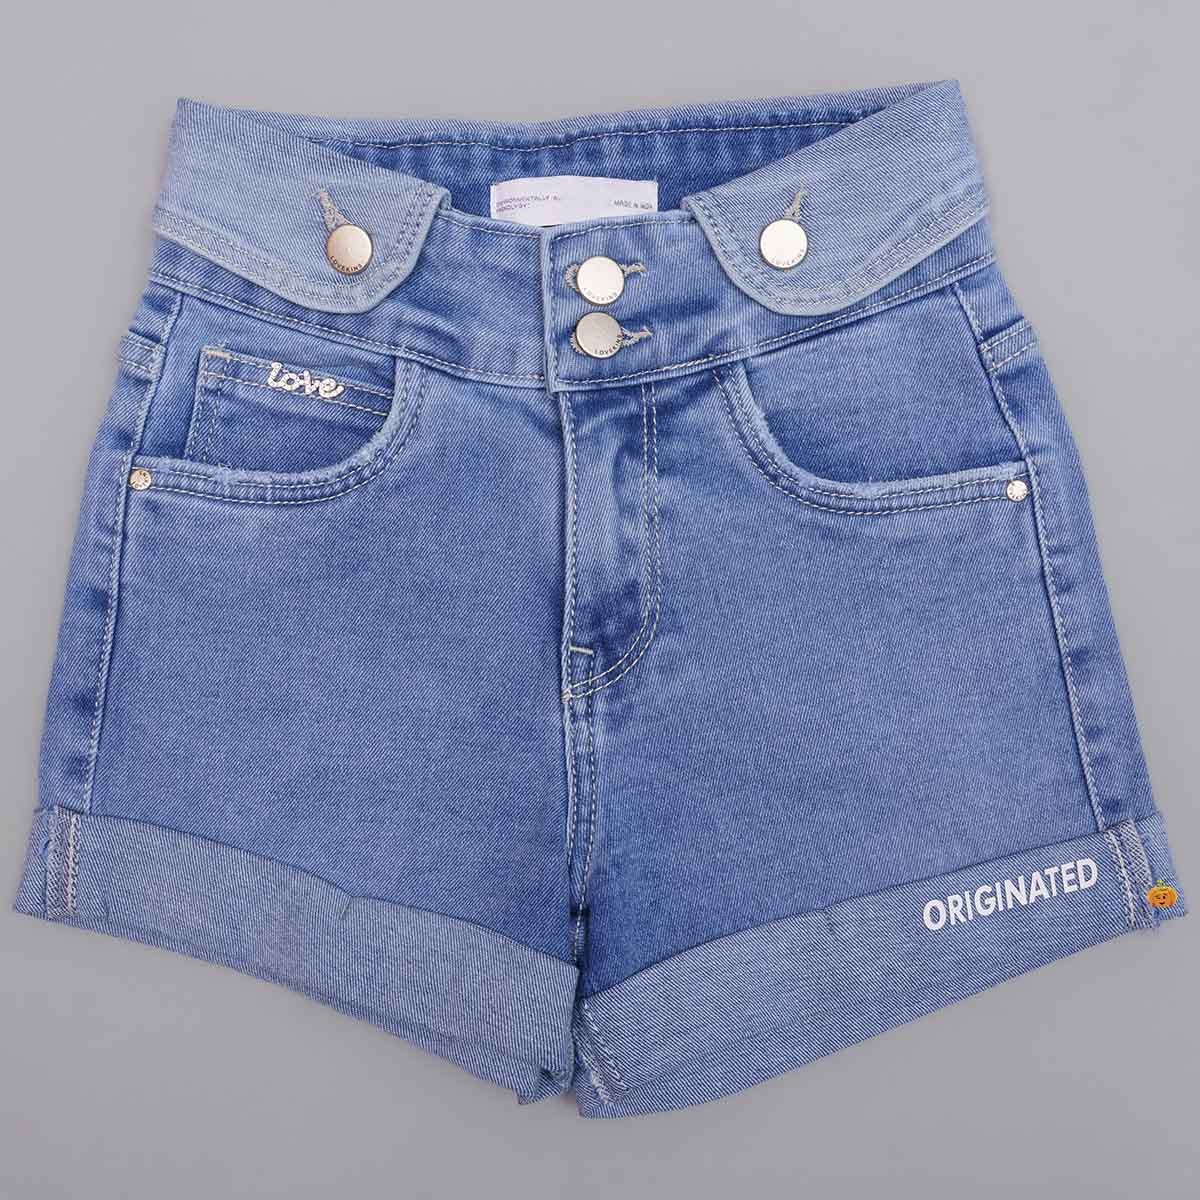 Shorts for Girls - Buy Girls Shorts Pants Online in India